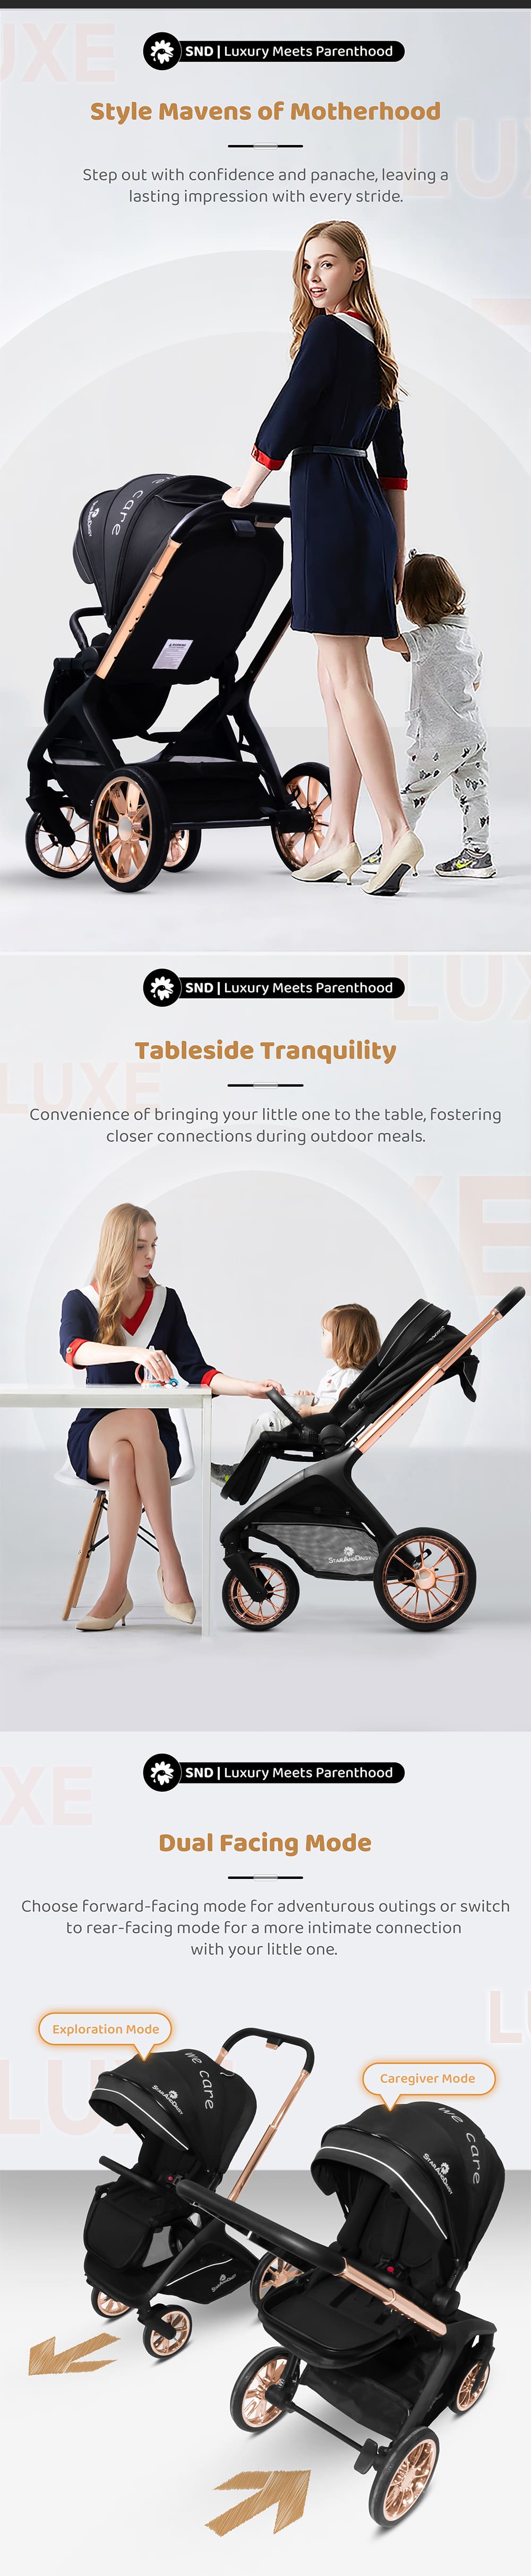 Baby Stroller with Dual Facing Mode